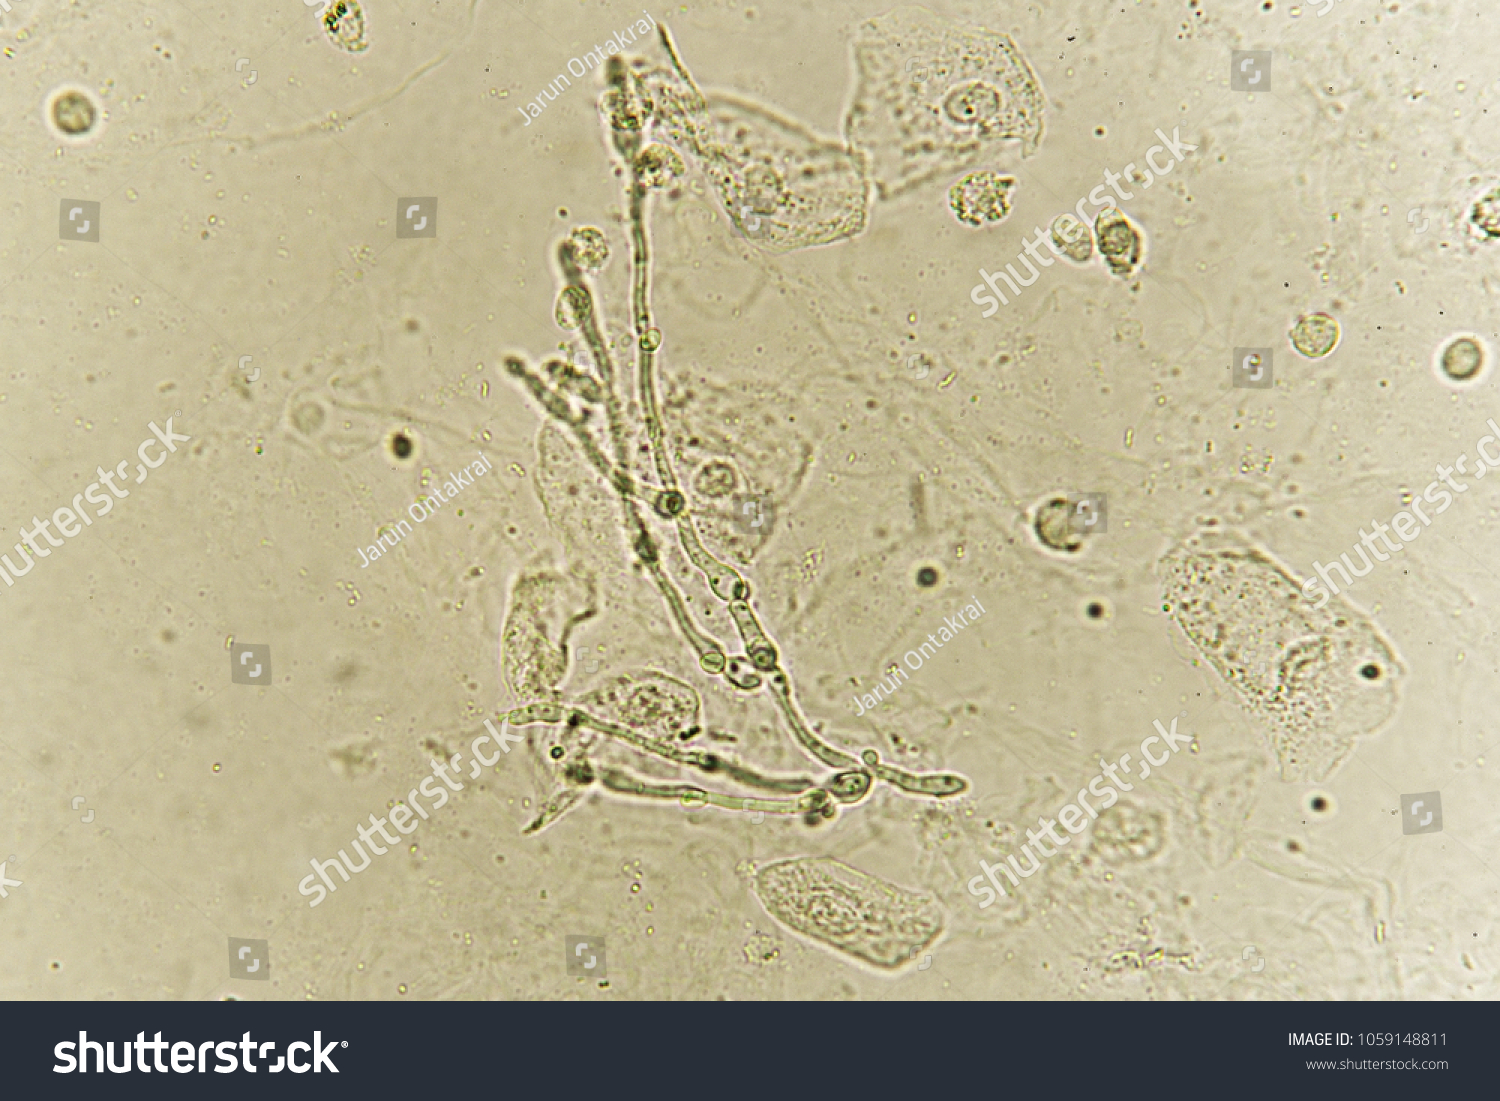 Pseudohyphae Budding Yeast Cells Patient Urine Stock Photo (Edit Now ...